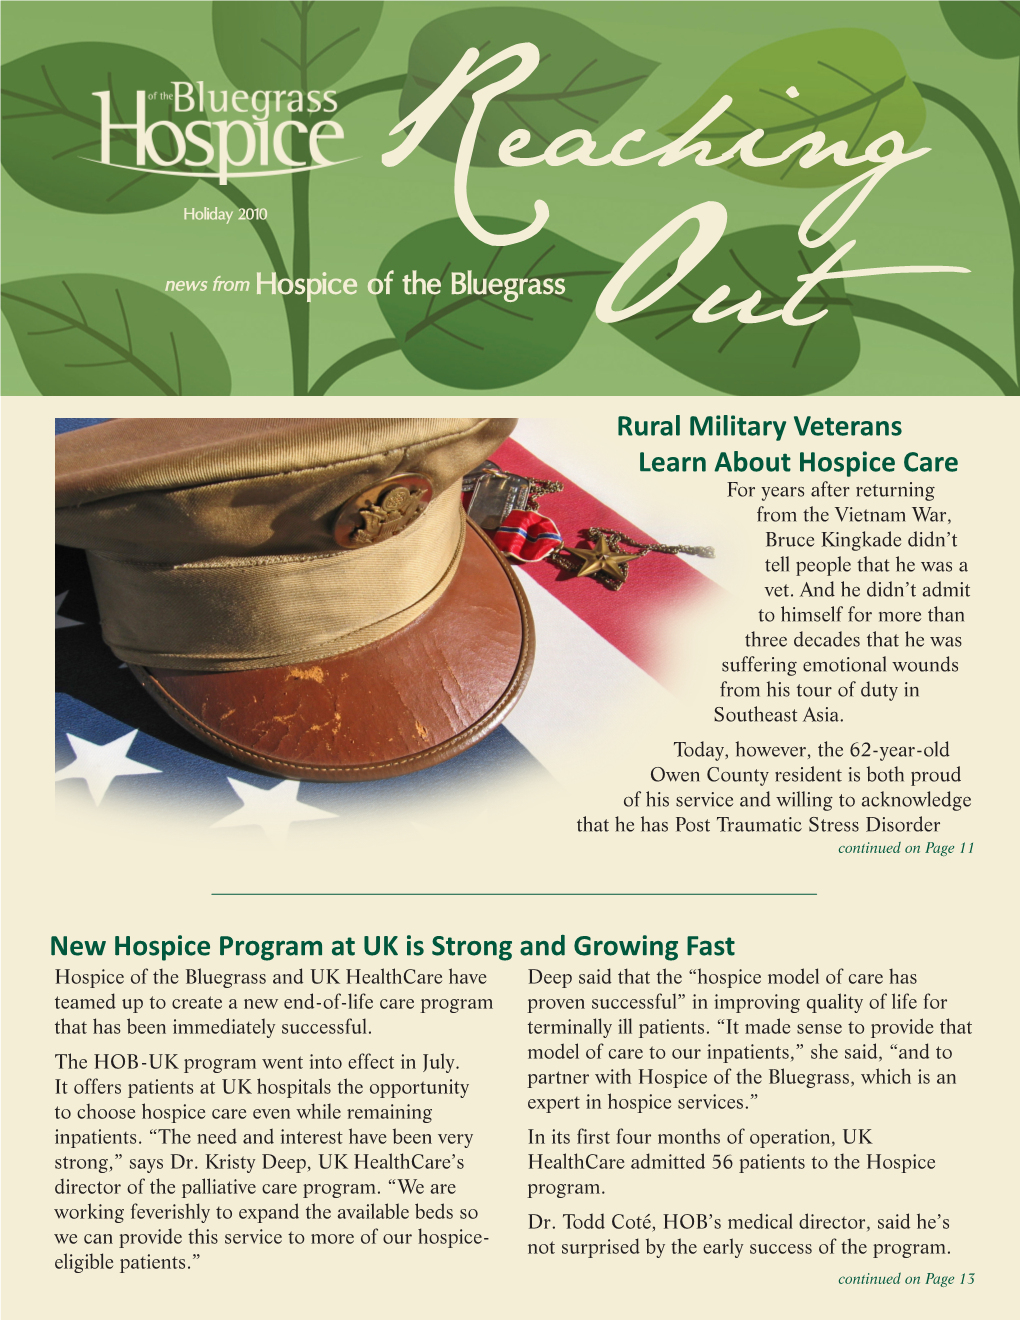 News from Hospice of the Bluegrass